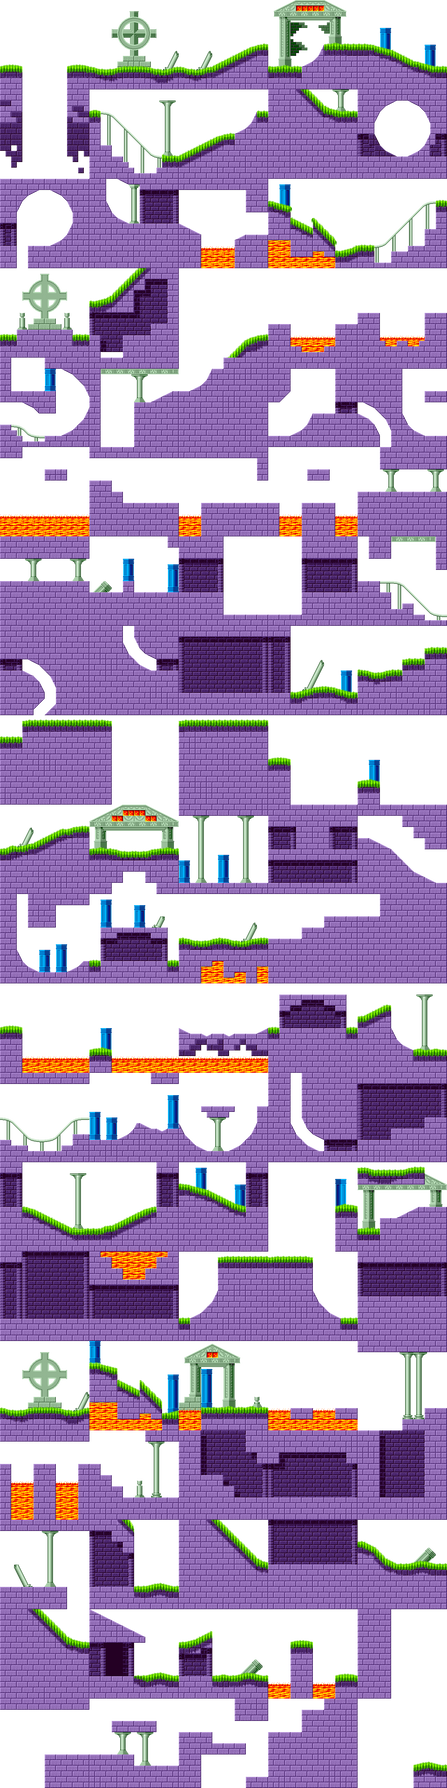 My Marble Layouts on Sonic 1 SMS REMAKE!! by HidroGeniuns on DeviantArt